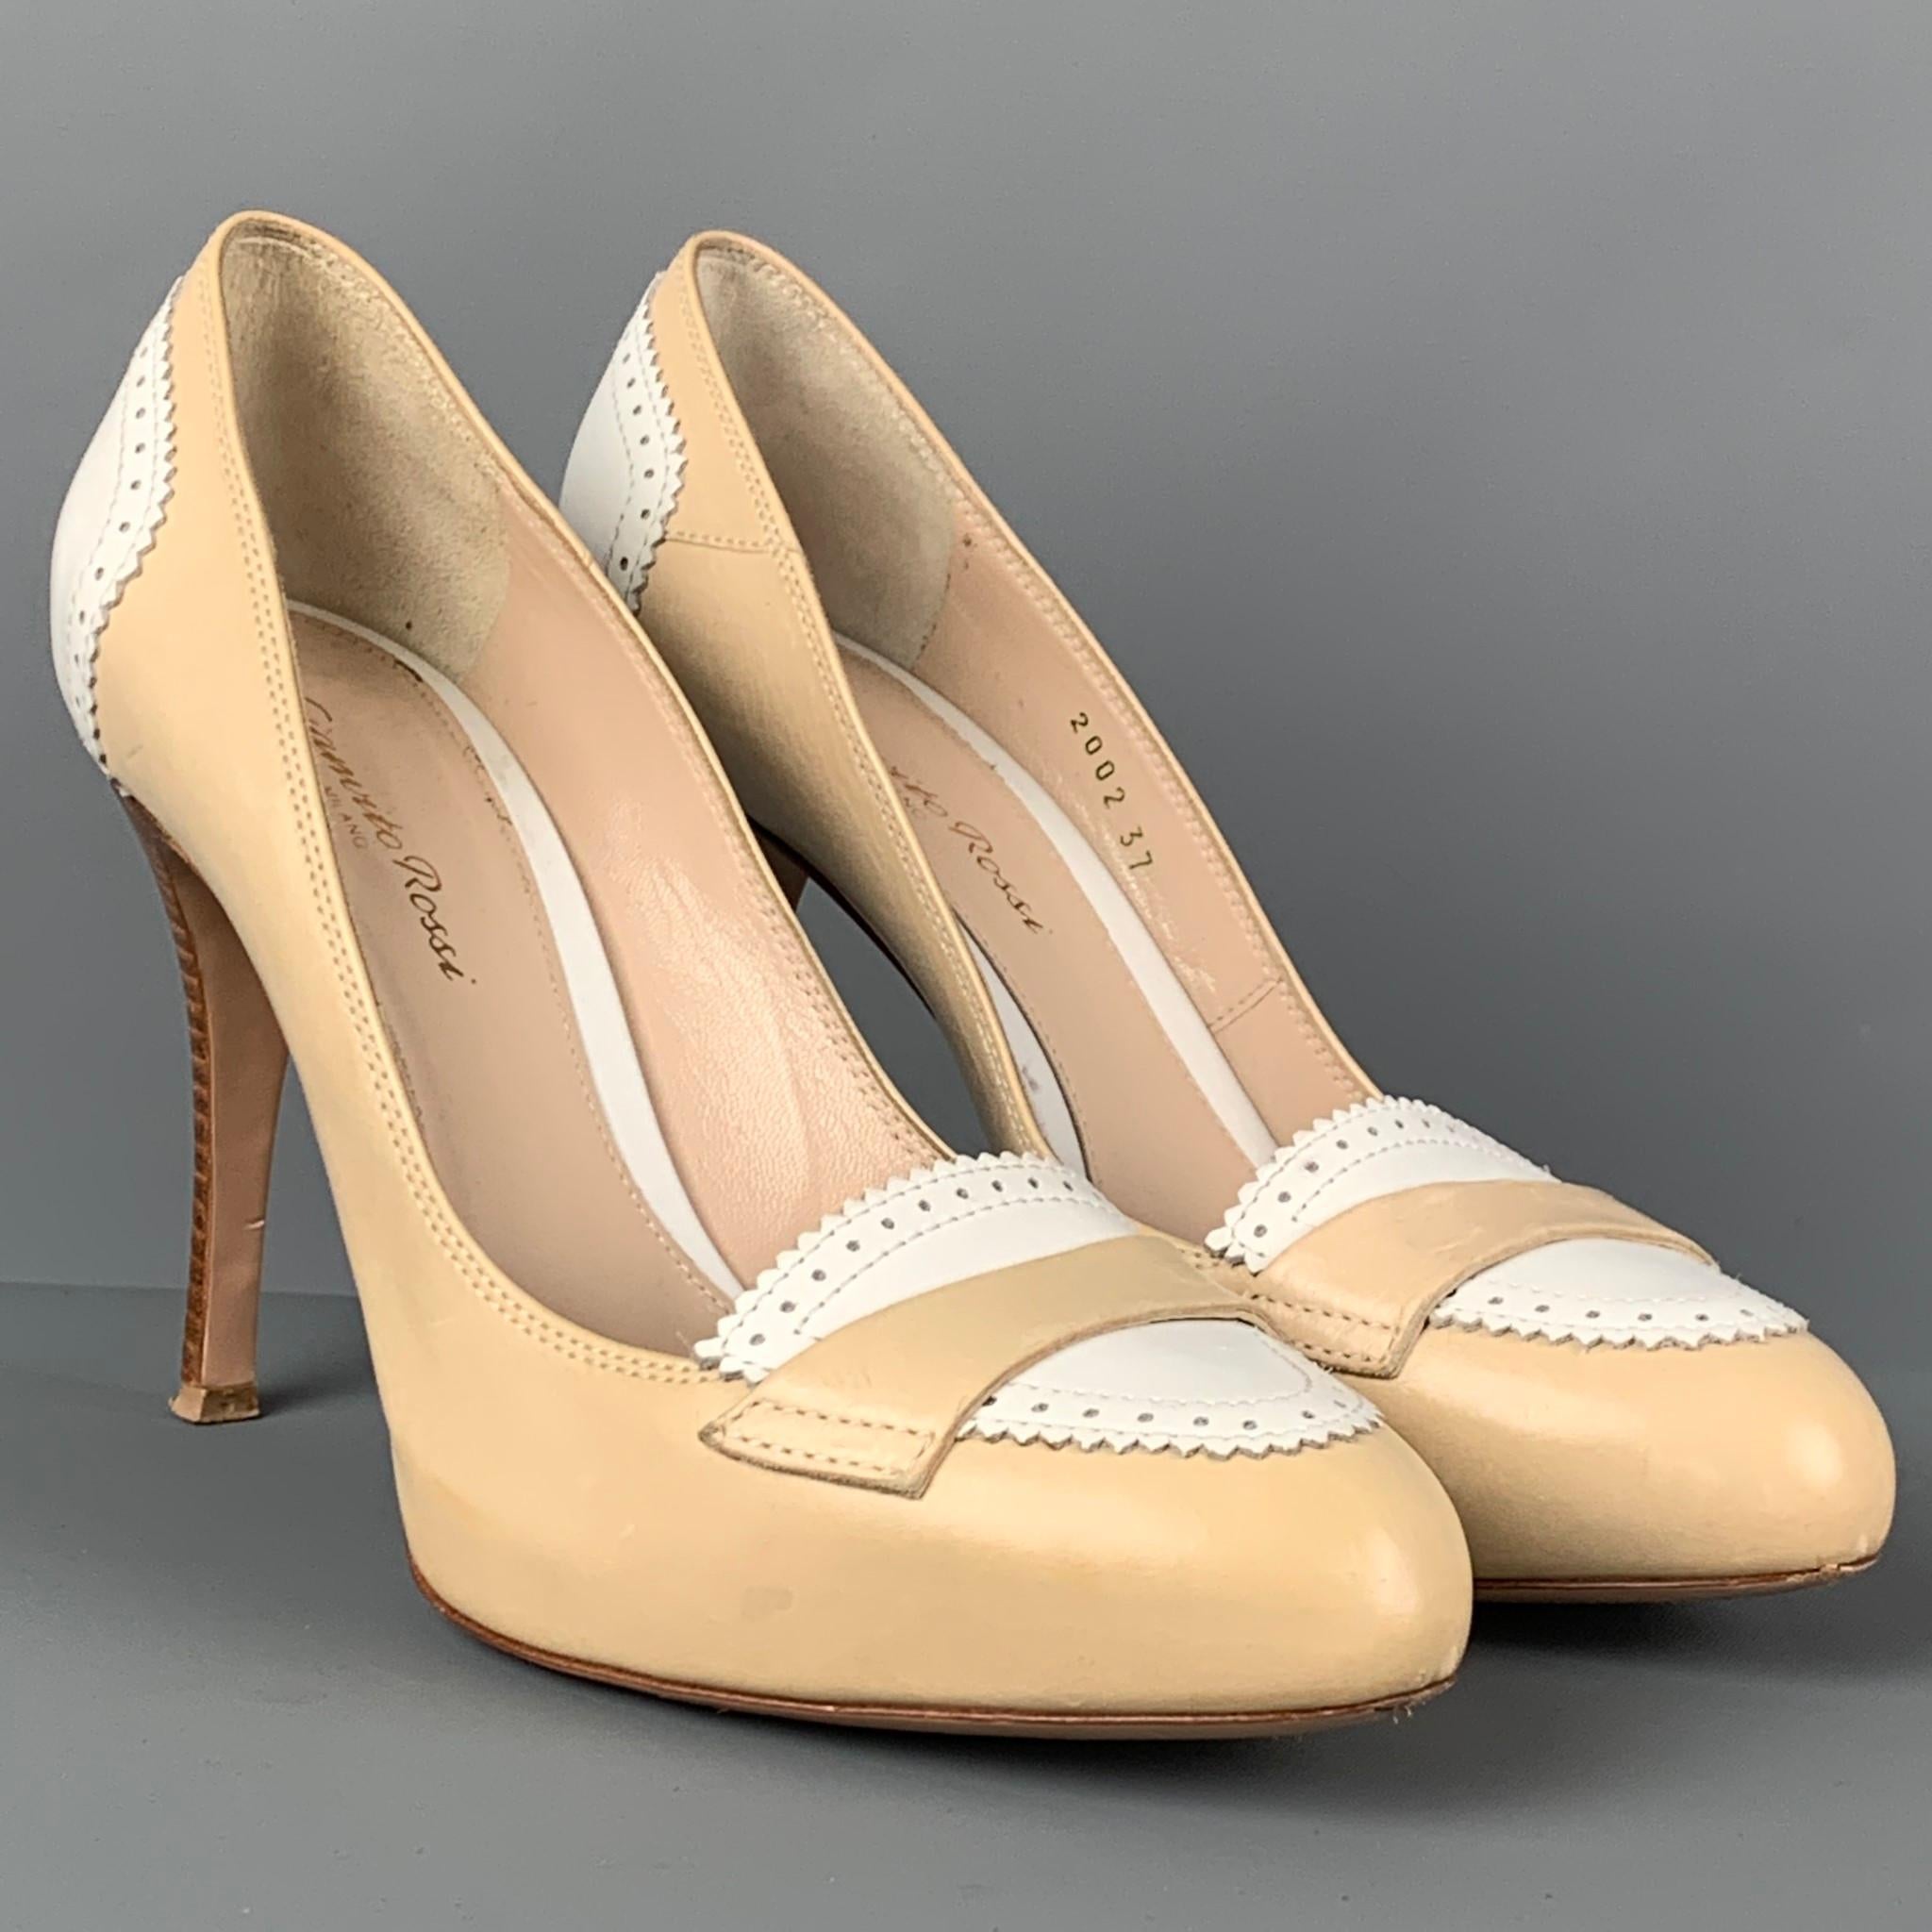 GIANVITO ROSSI pumps comes in a beige & cream perforated leather featuring a front strap detail and a stiletto heel. Made in Italy. 

Very Good Pre-Owned Condition.
Marked: 37
Original Retail Price: $750.00

Measurements:

Heel: 4 in. 